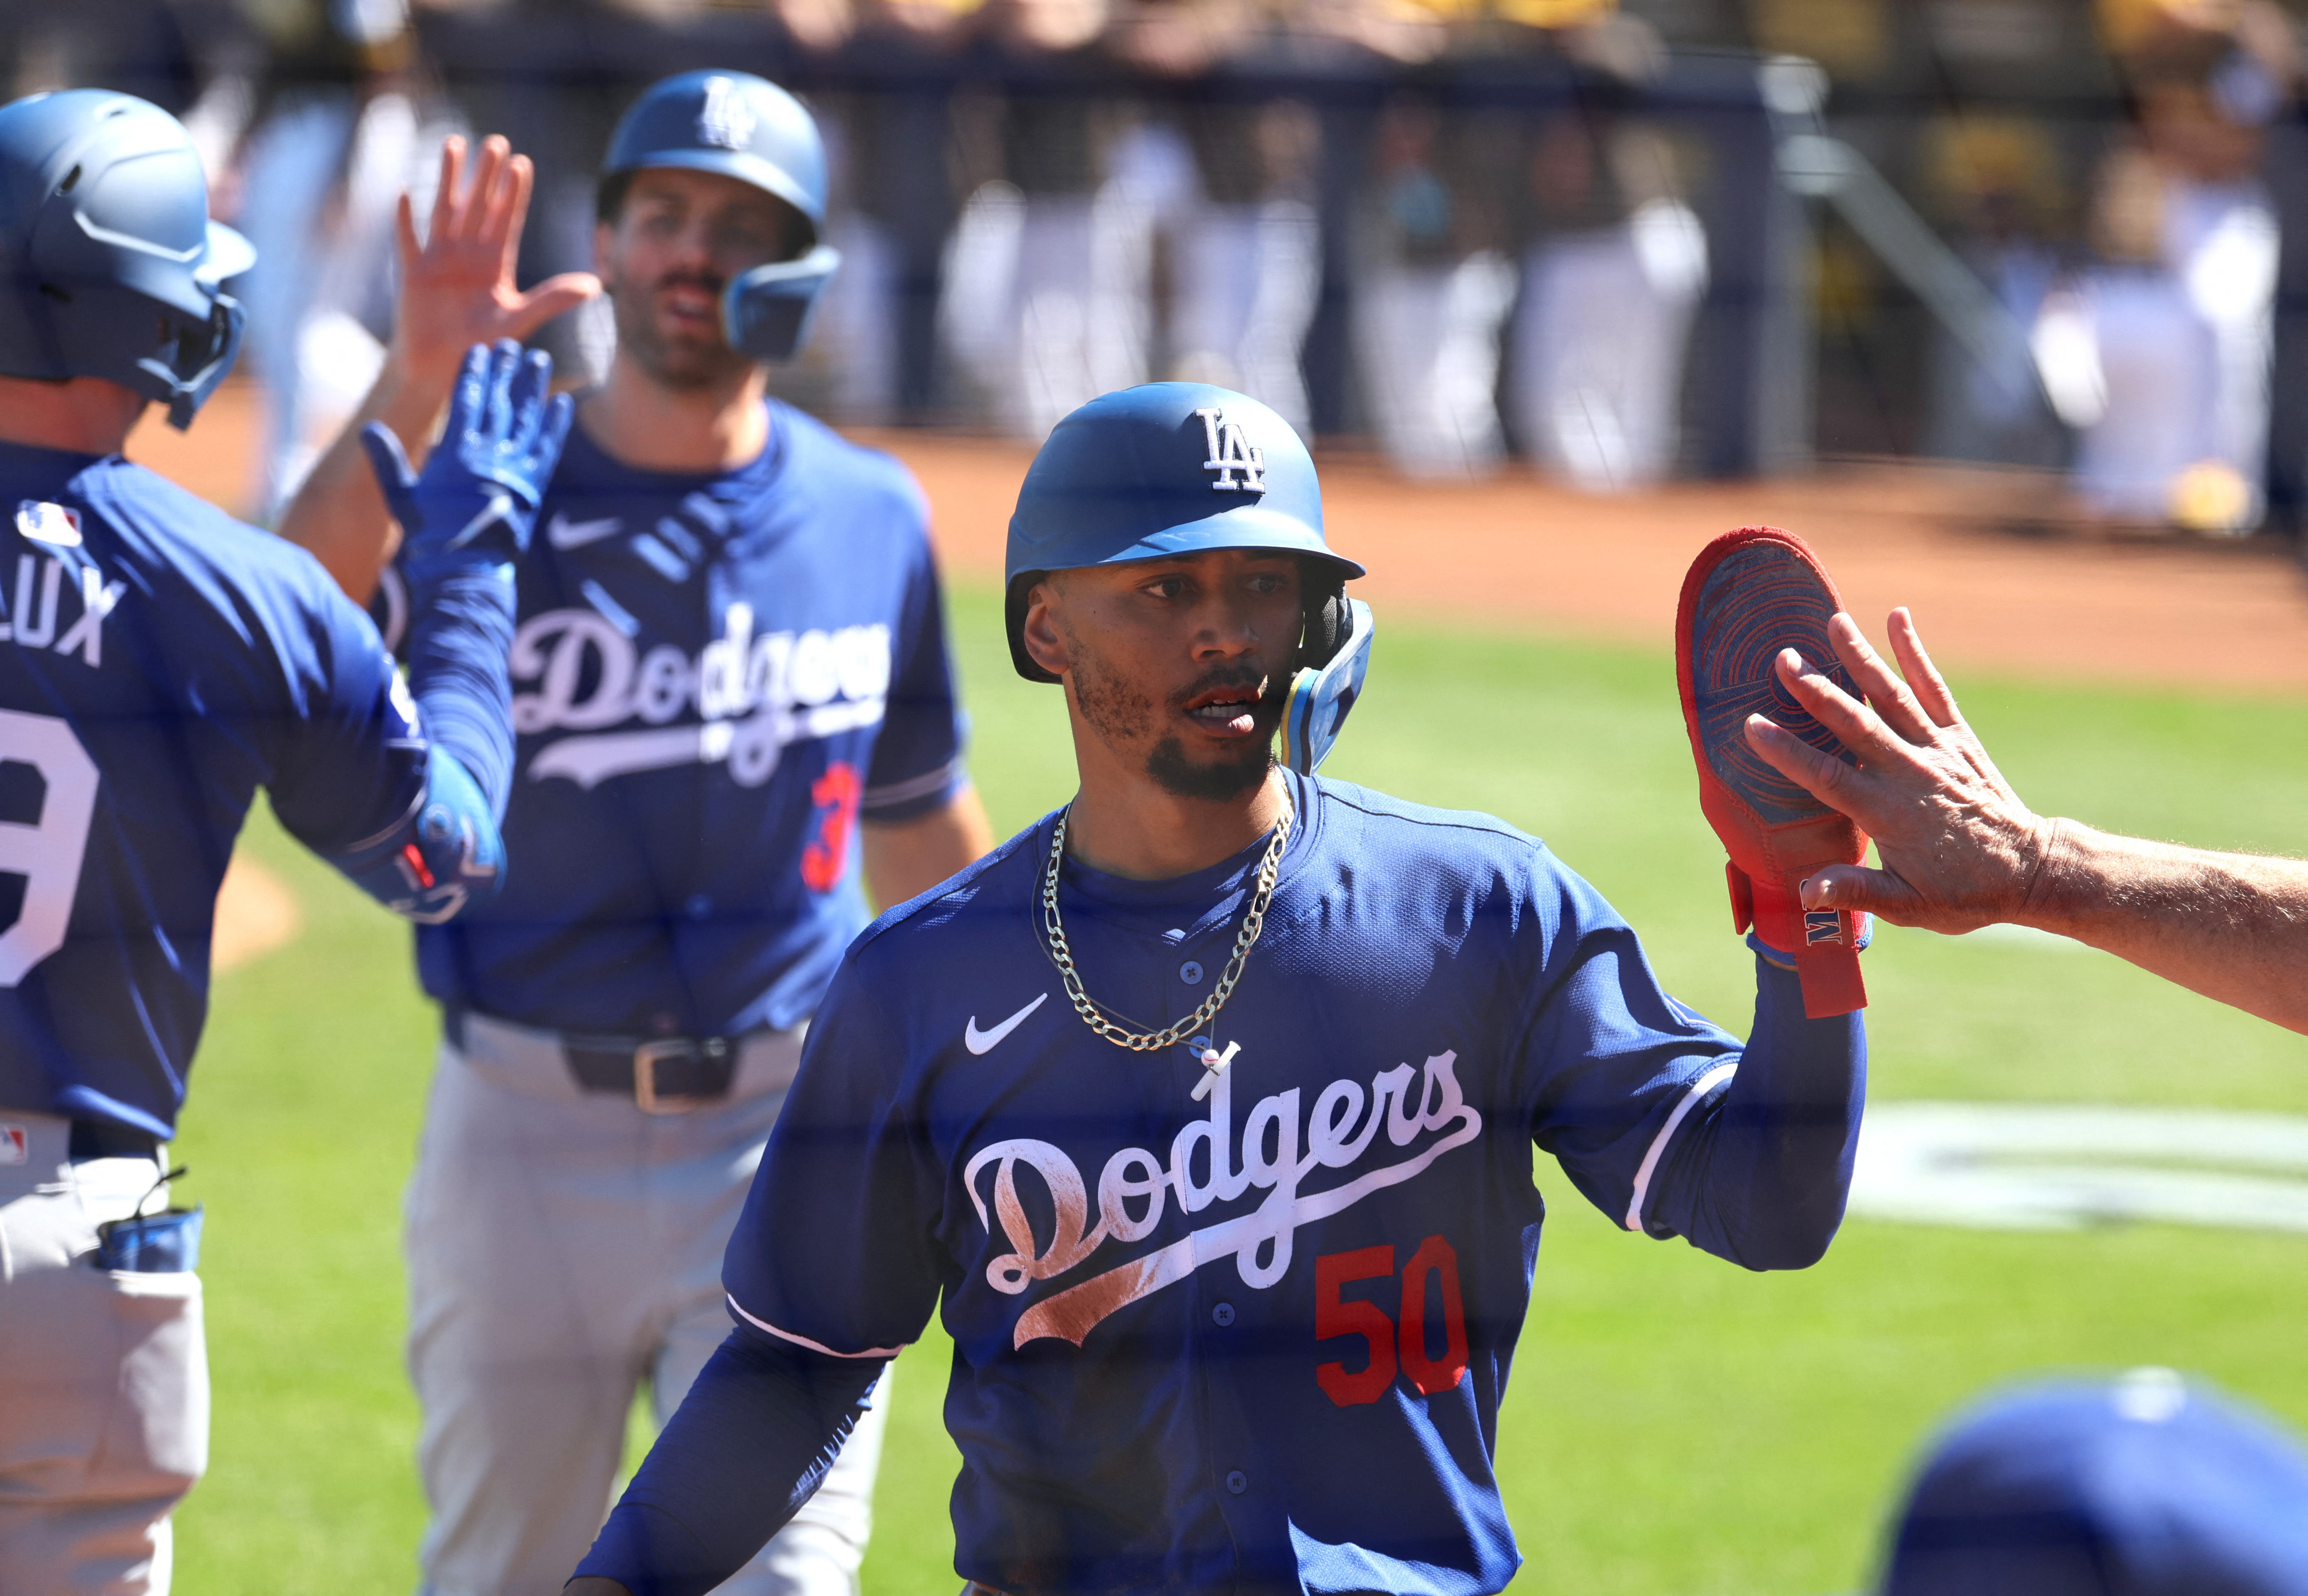 Padres crushed by Dodgers 14-1 in spring training kick-off